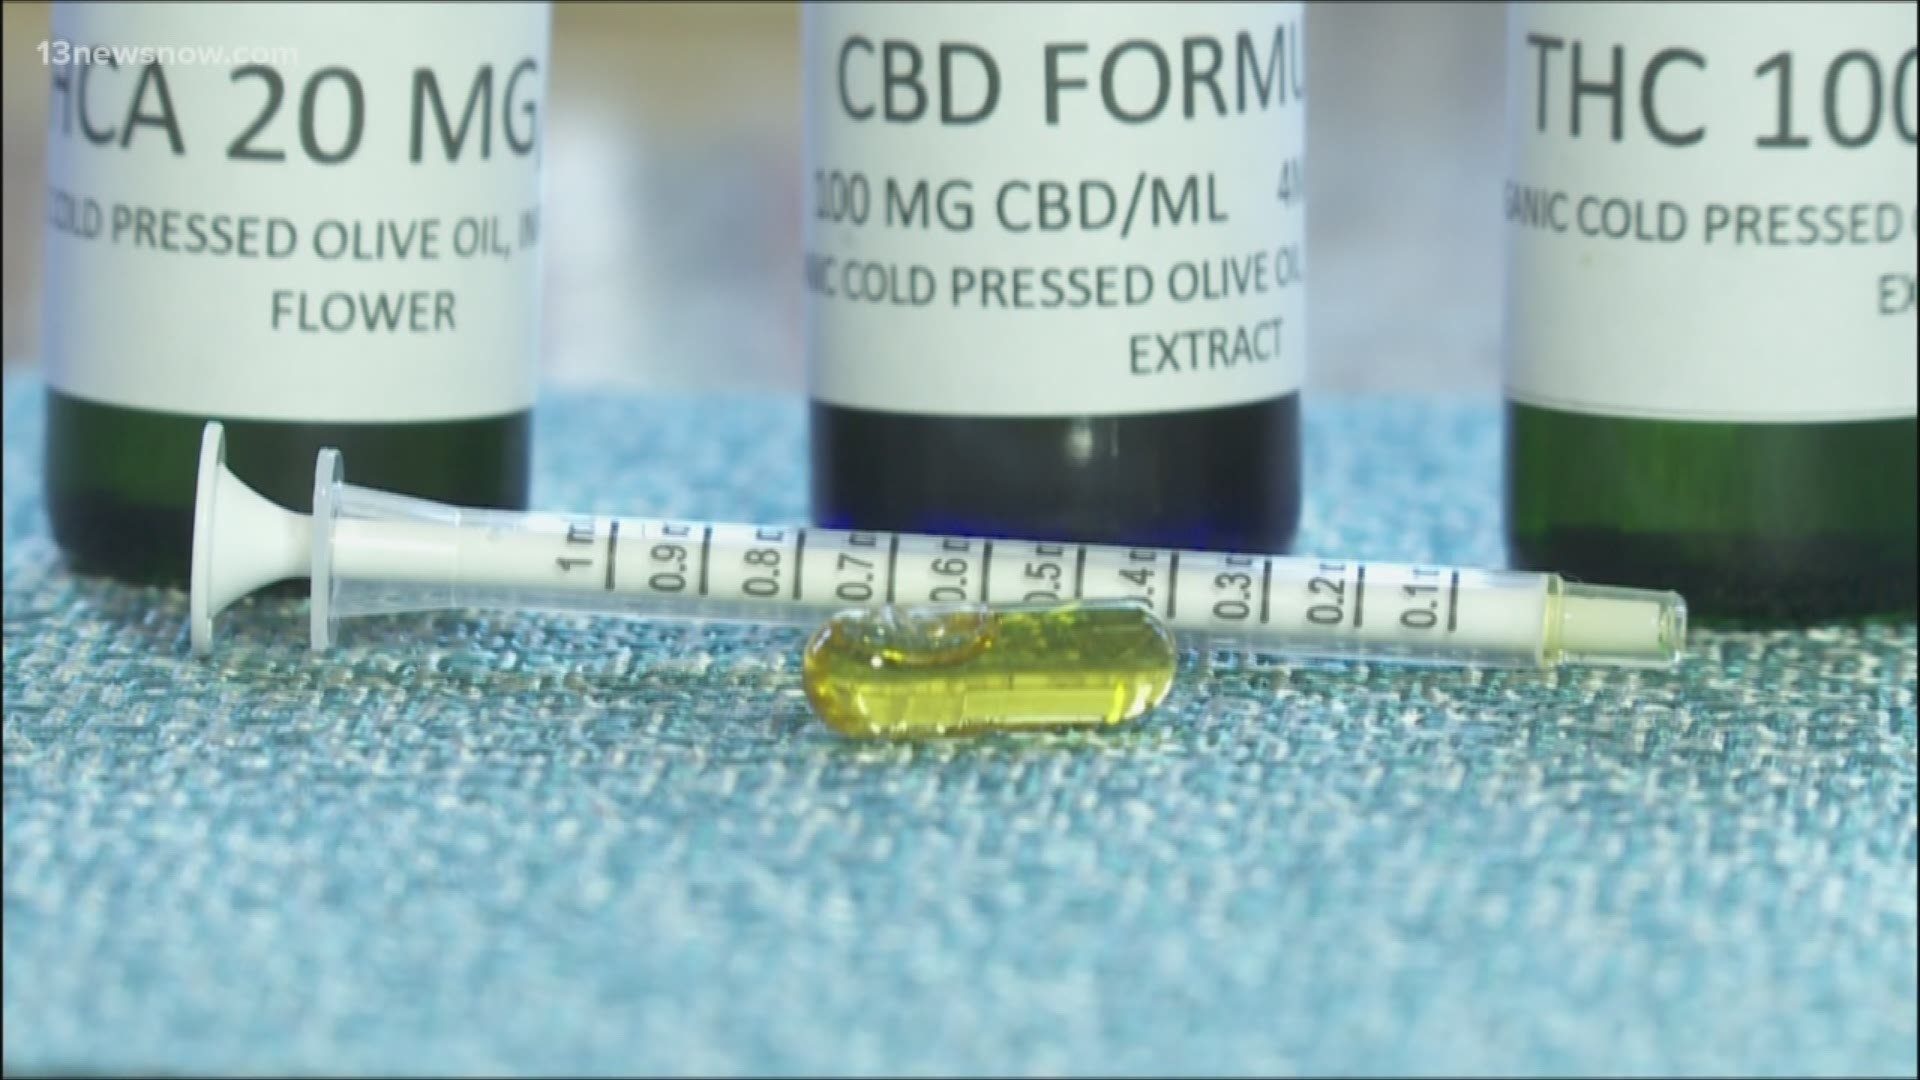 CBD oil is legal in Virginia and has become increasingly popular. Experts said people use it for several different reasons.